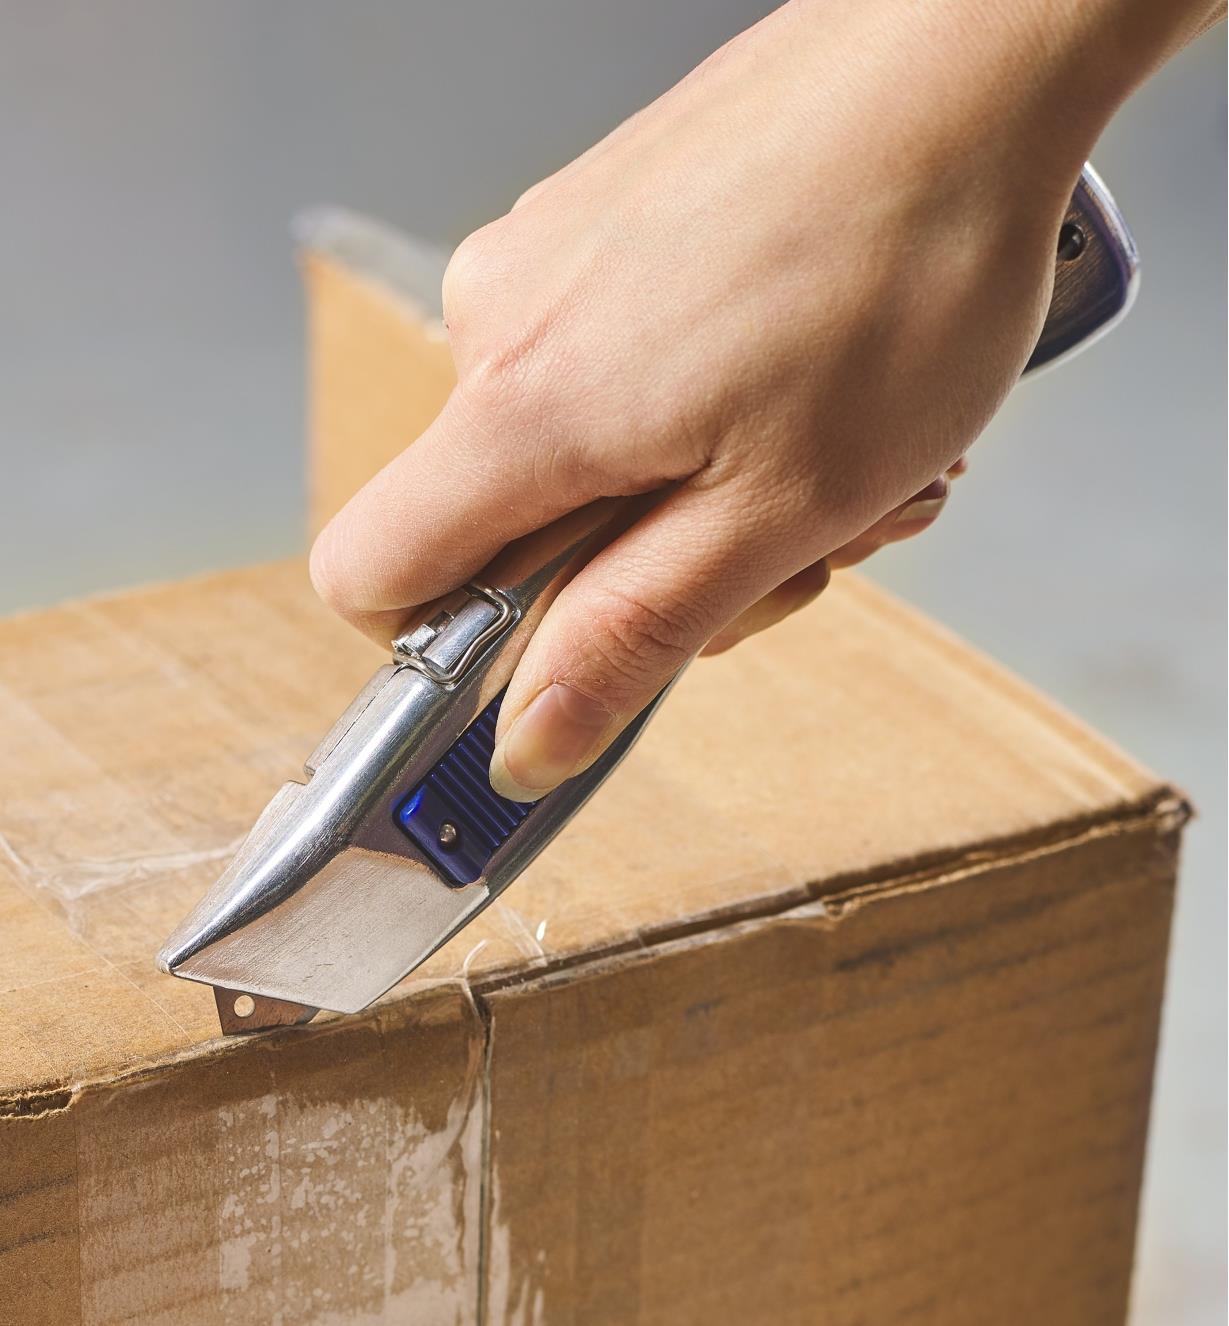 The Delphin 2013 retractable knife being used to cut open a taped box